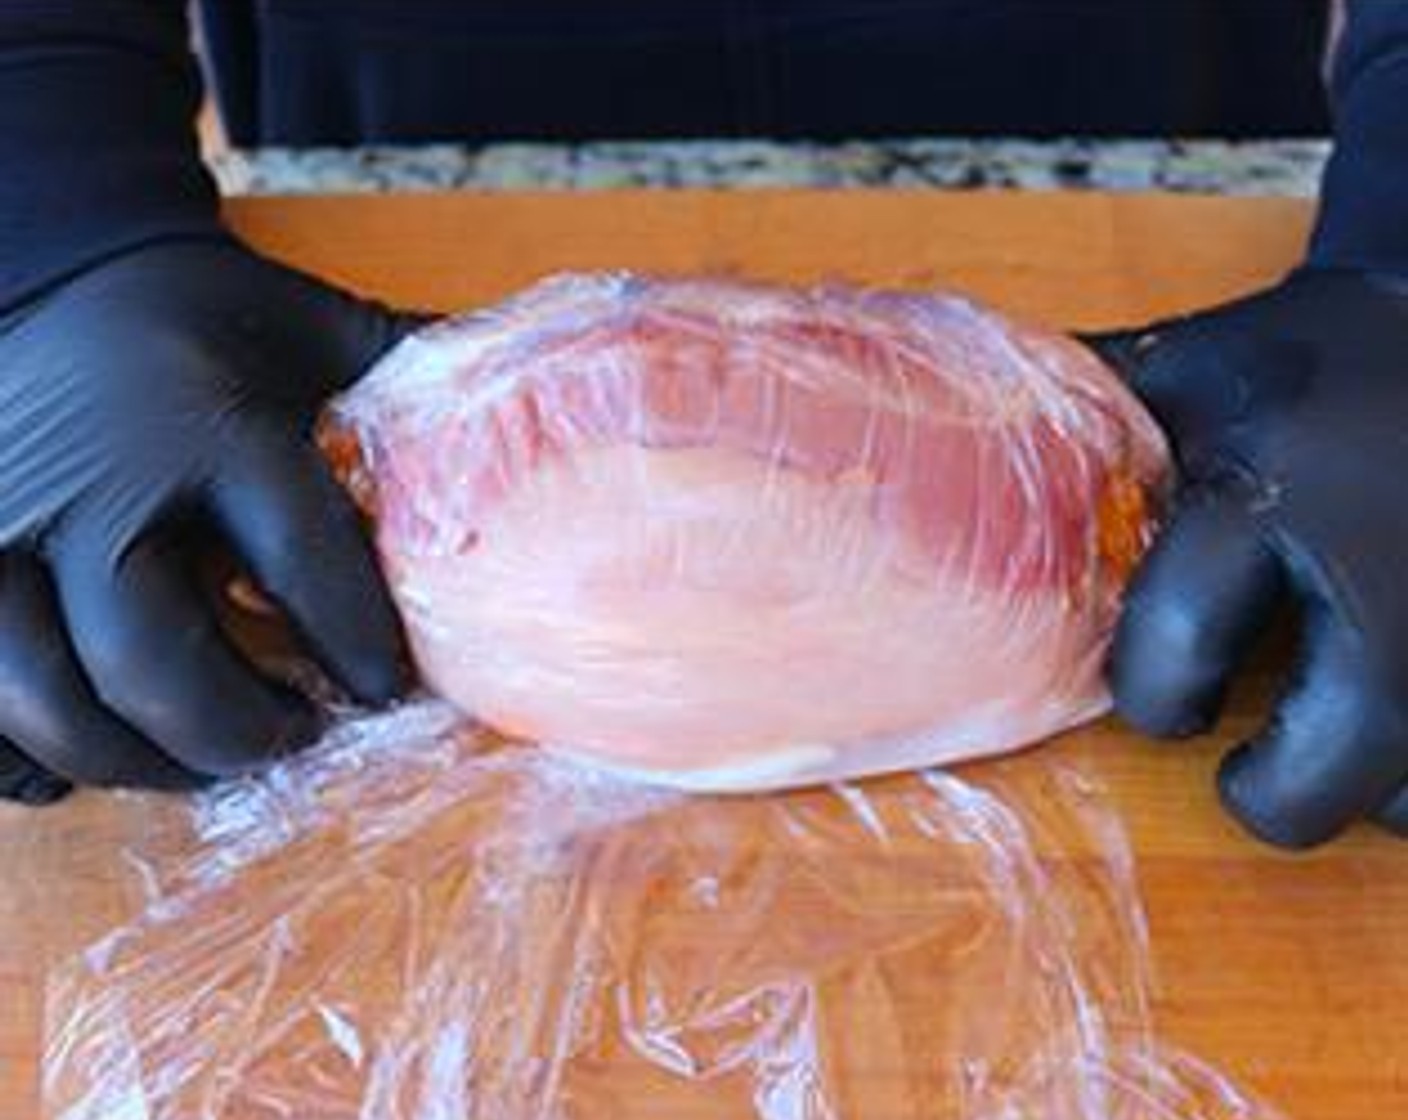 step 5 Fold the edges of the turkey breast around and cover tightly with plastic wrap. Store in refrigerator for 2 hours up to overnight.